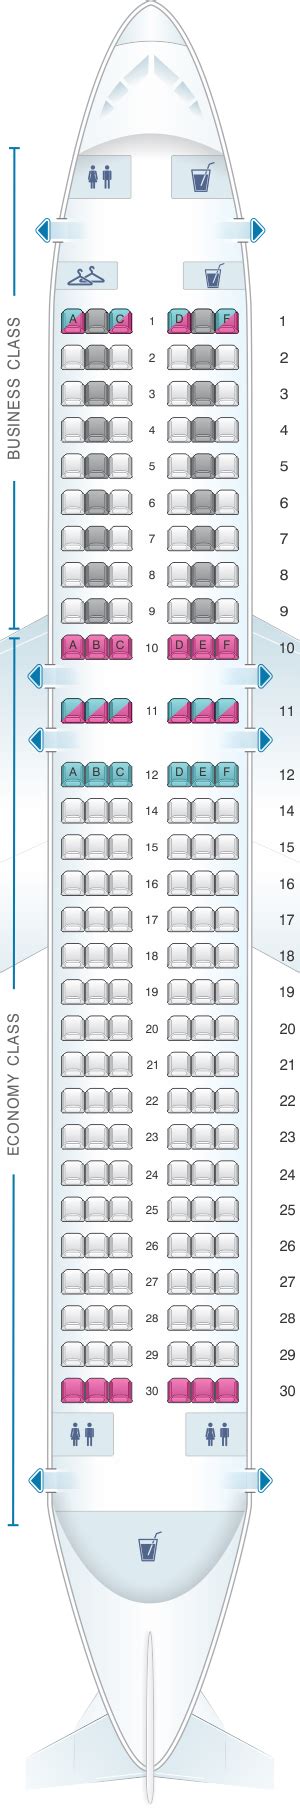 Seat Map Air France Airbus A320 Europe V1 | SeatMaestro